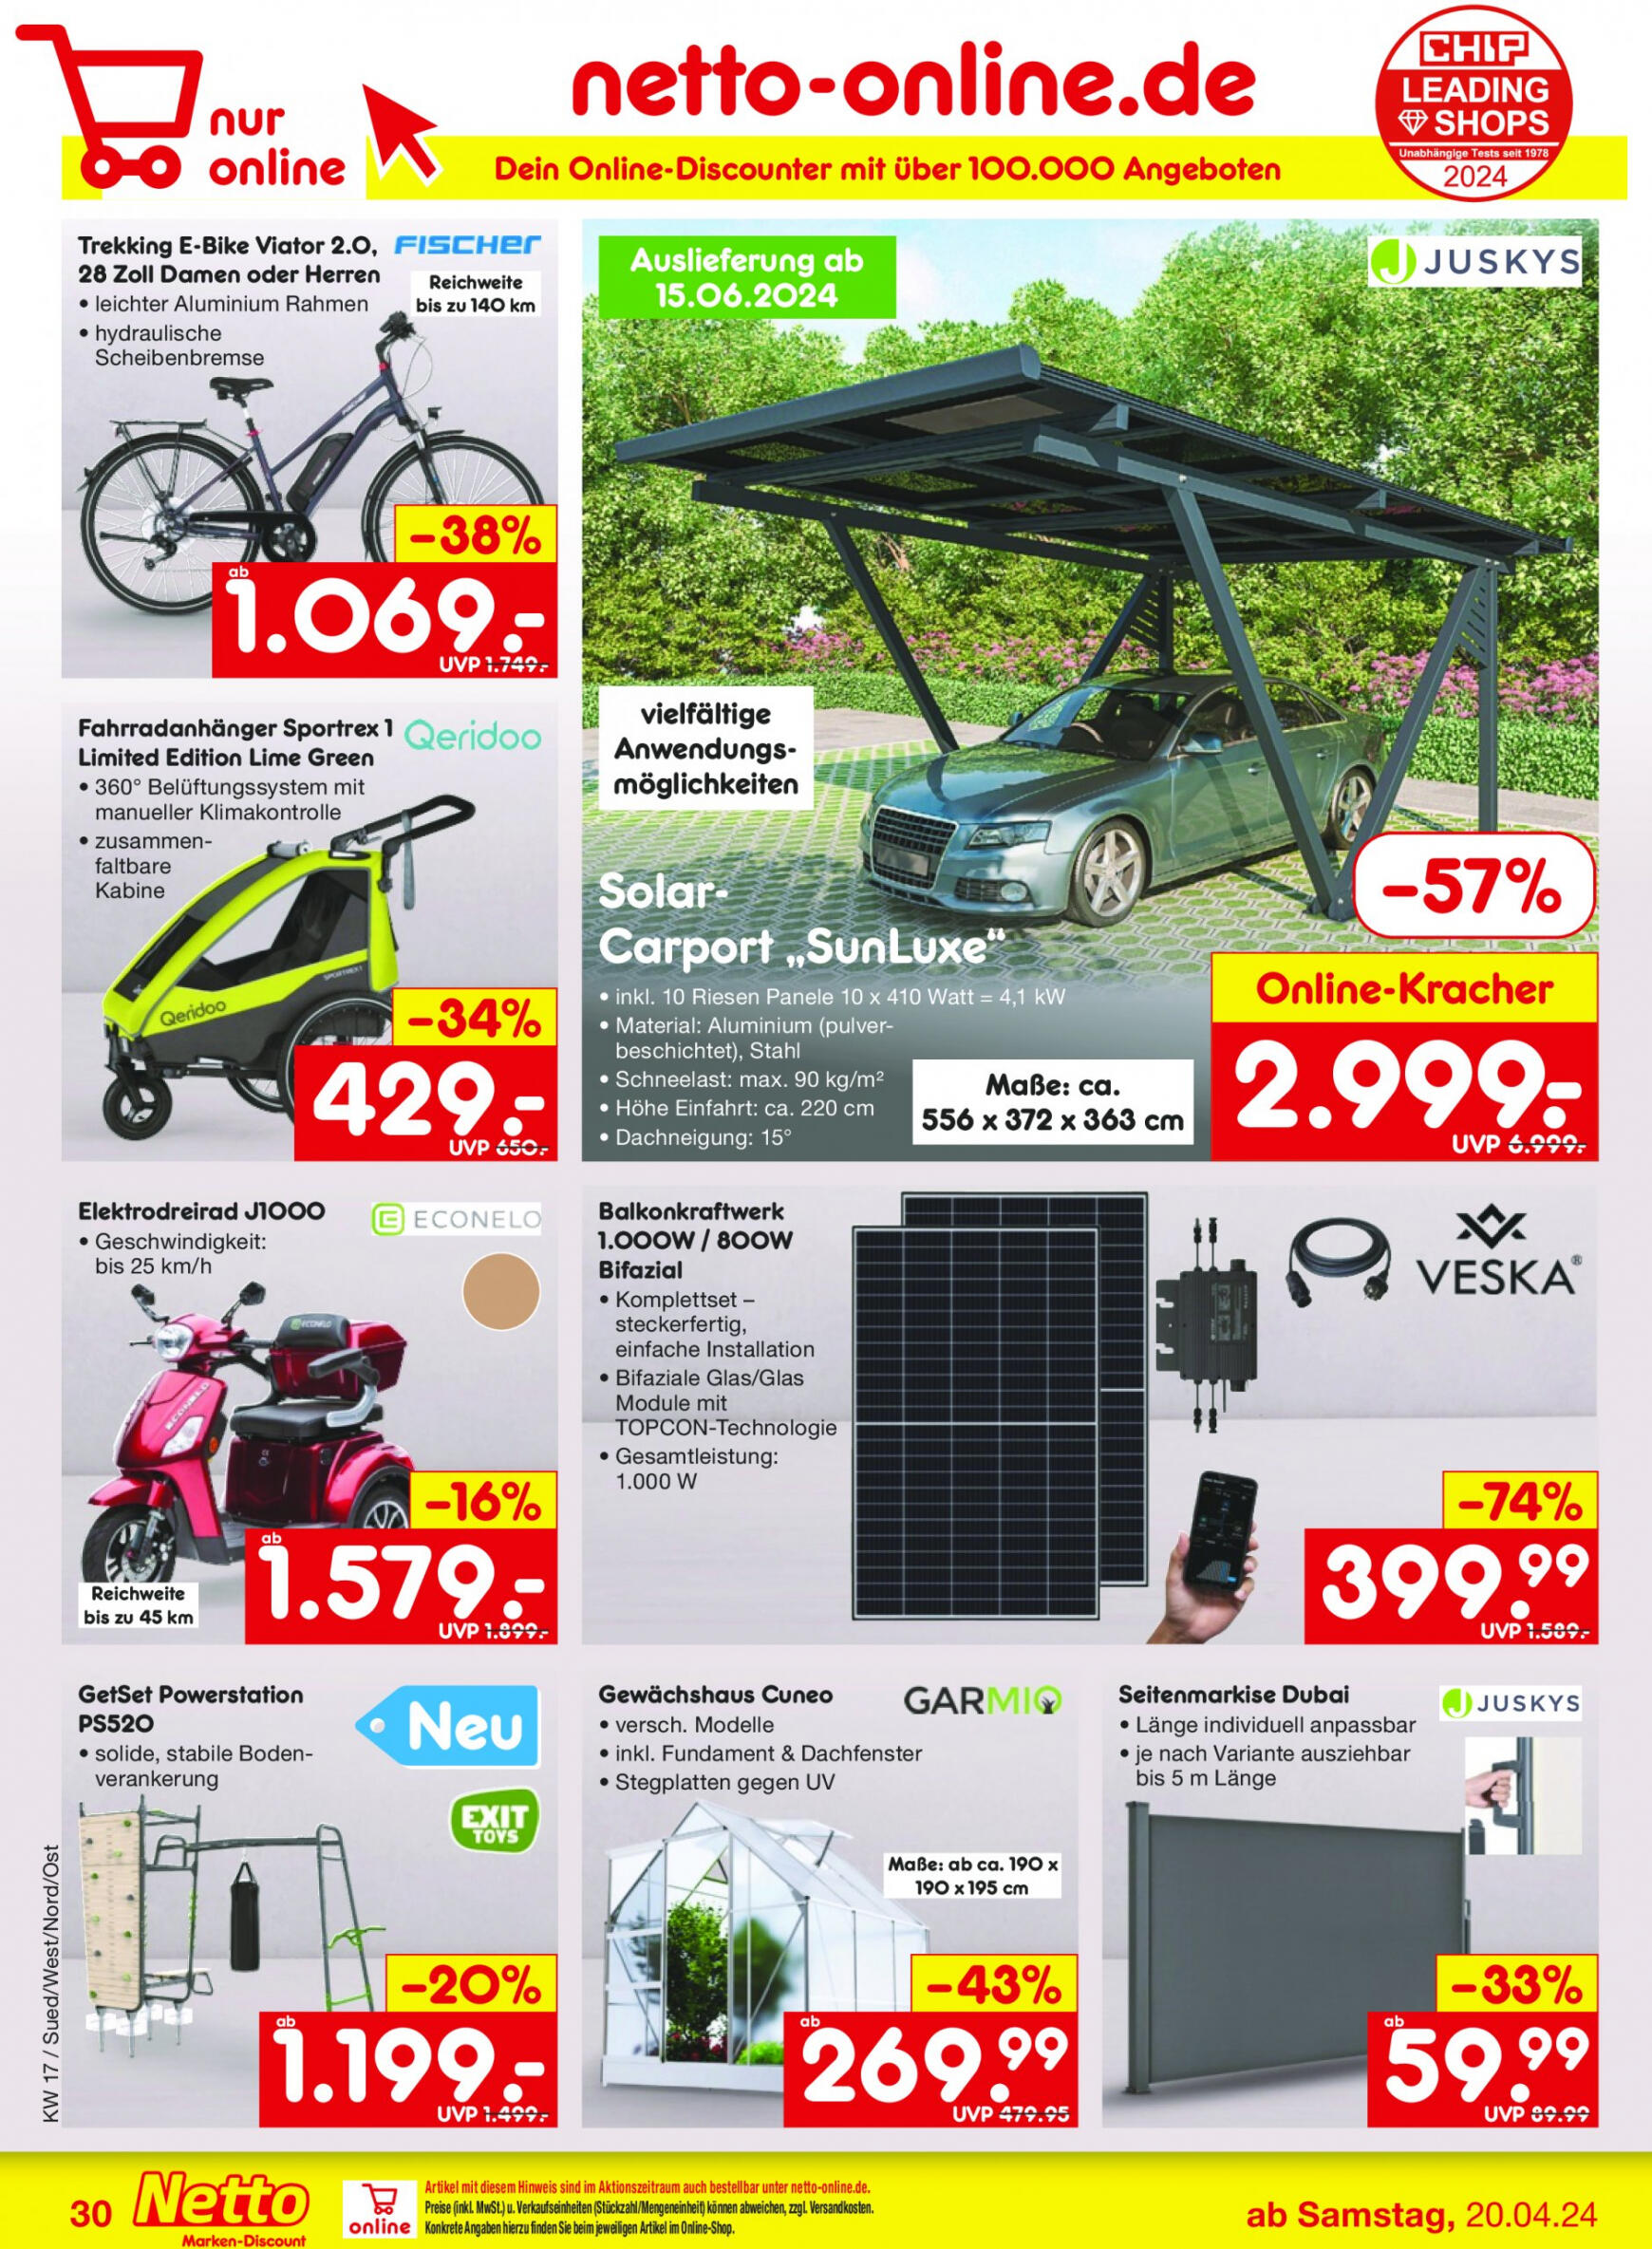 netto - Flyer Netto aktuell 22.04. - 27.04. - page: 32